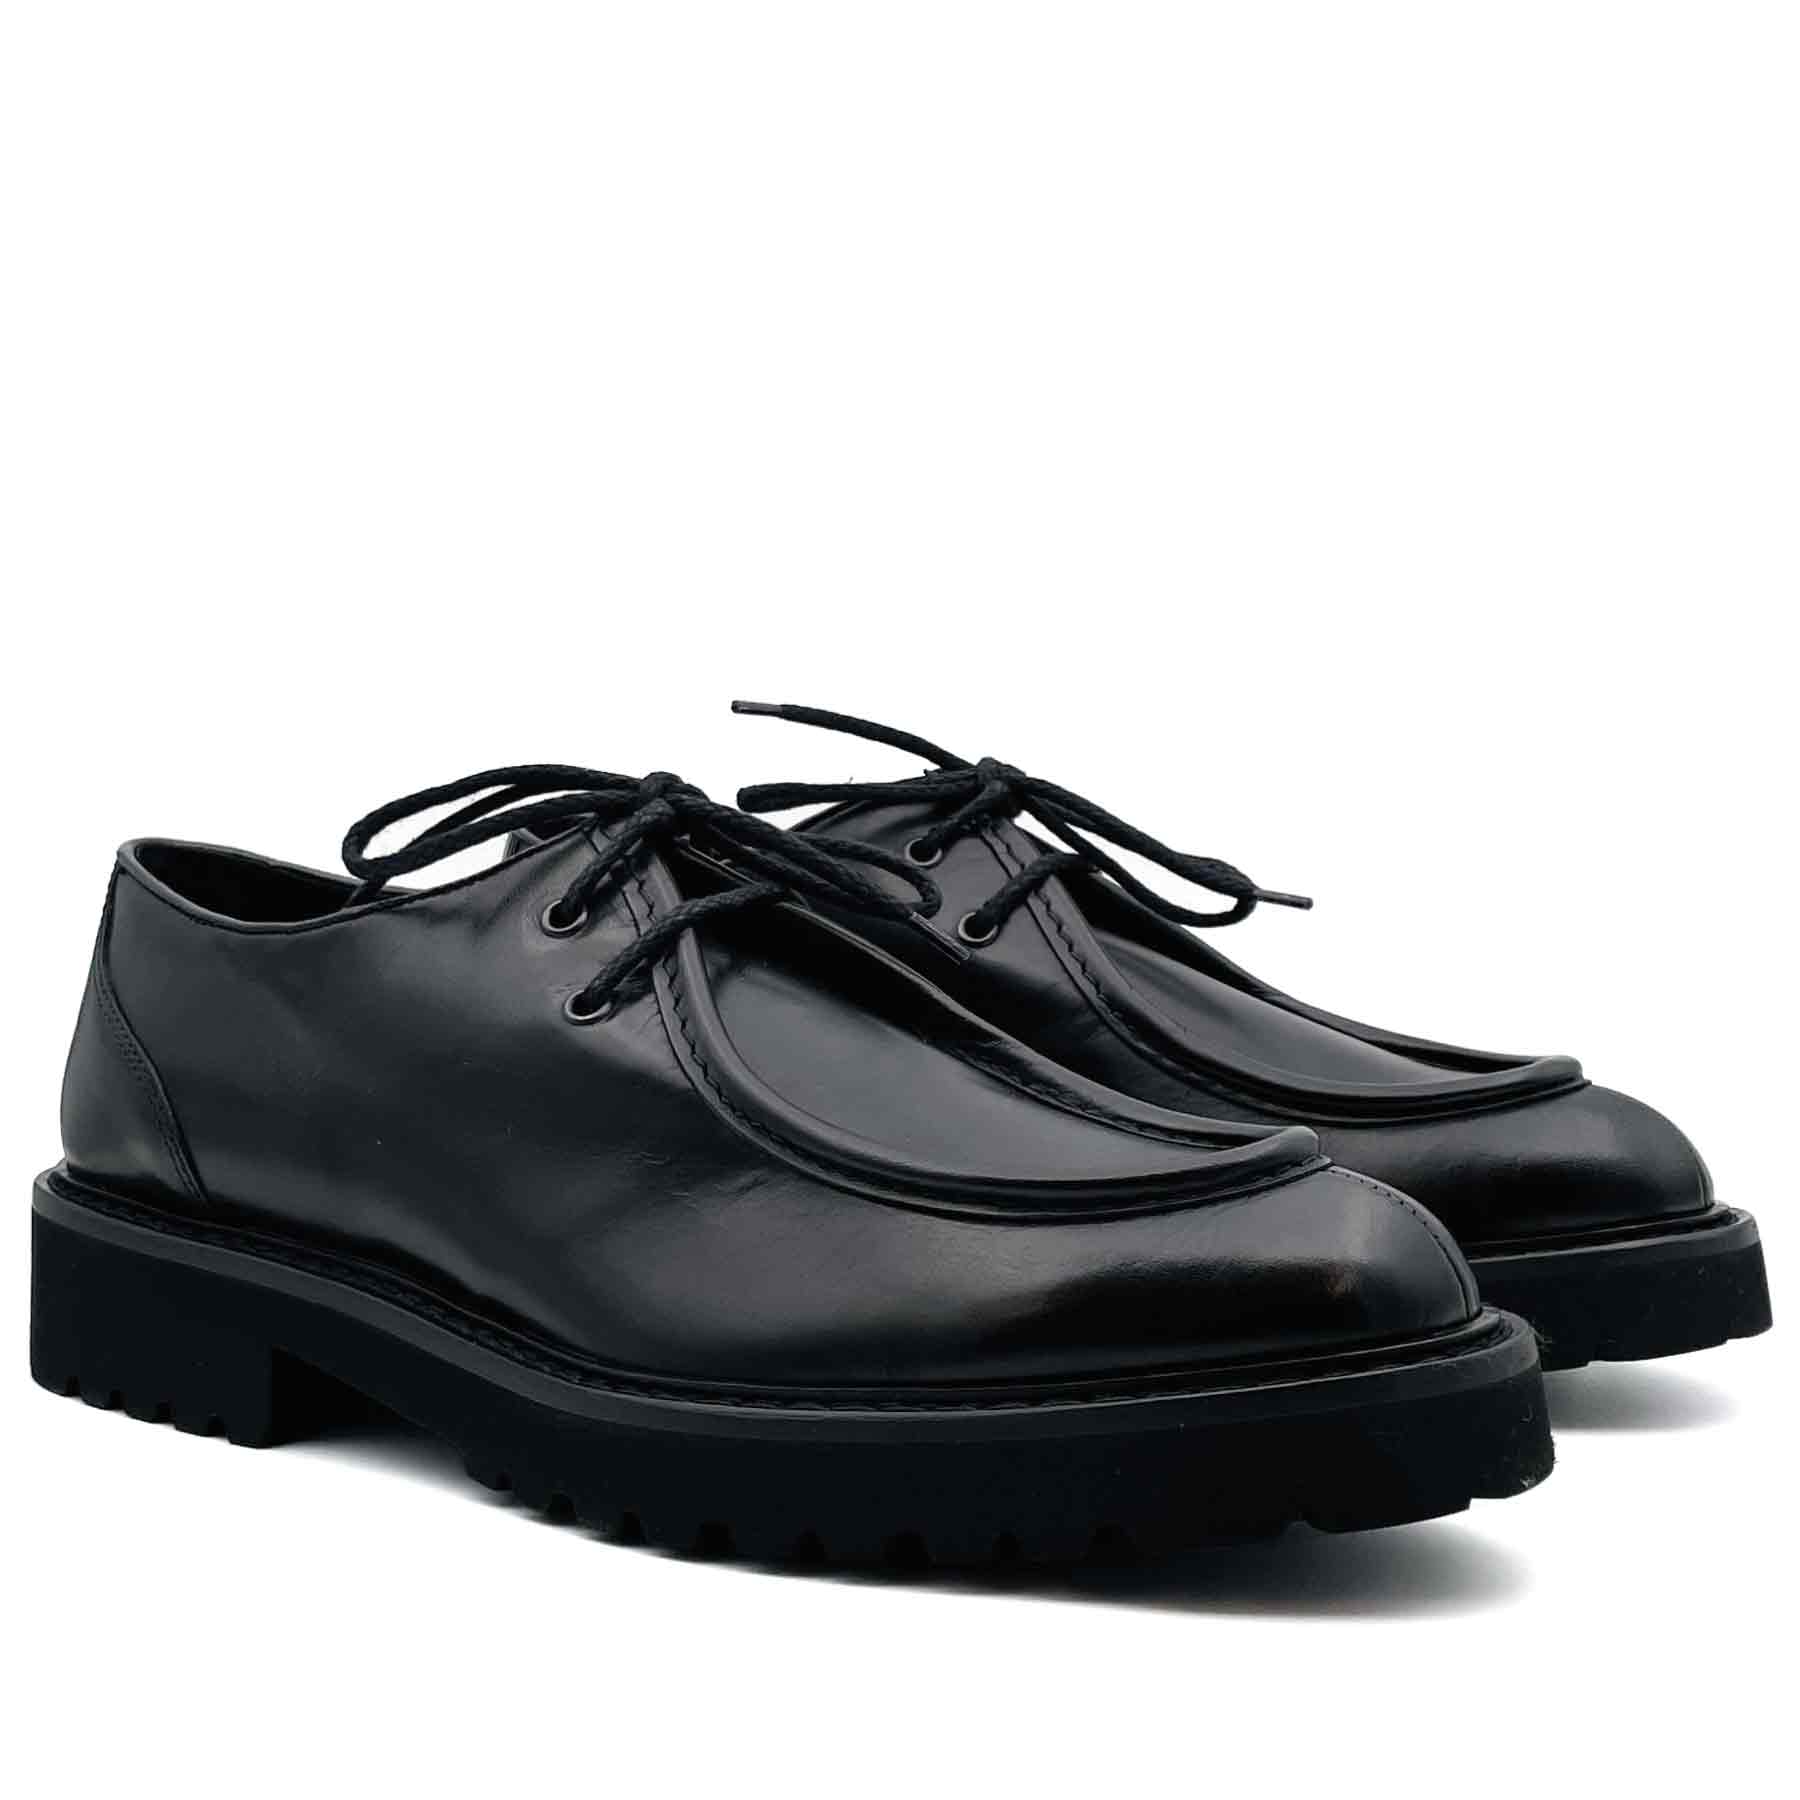 BLACK TWO-HOLE LEATHER LACE-UP